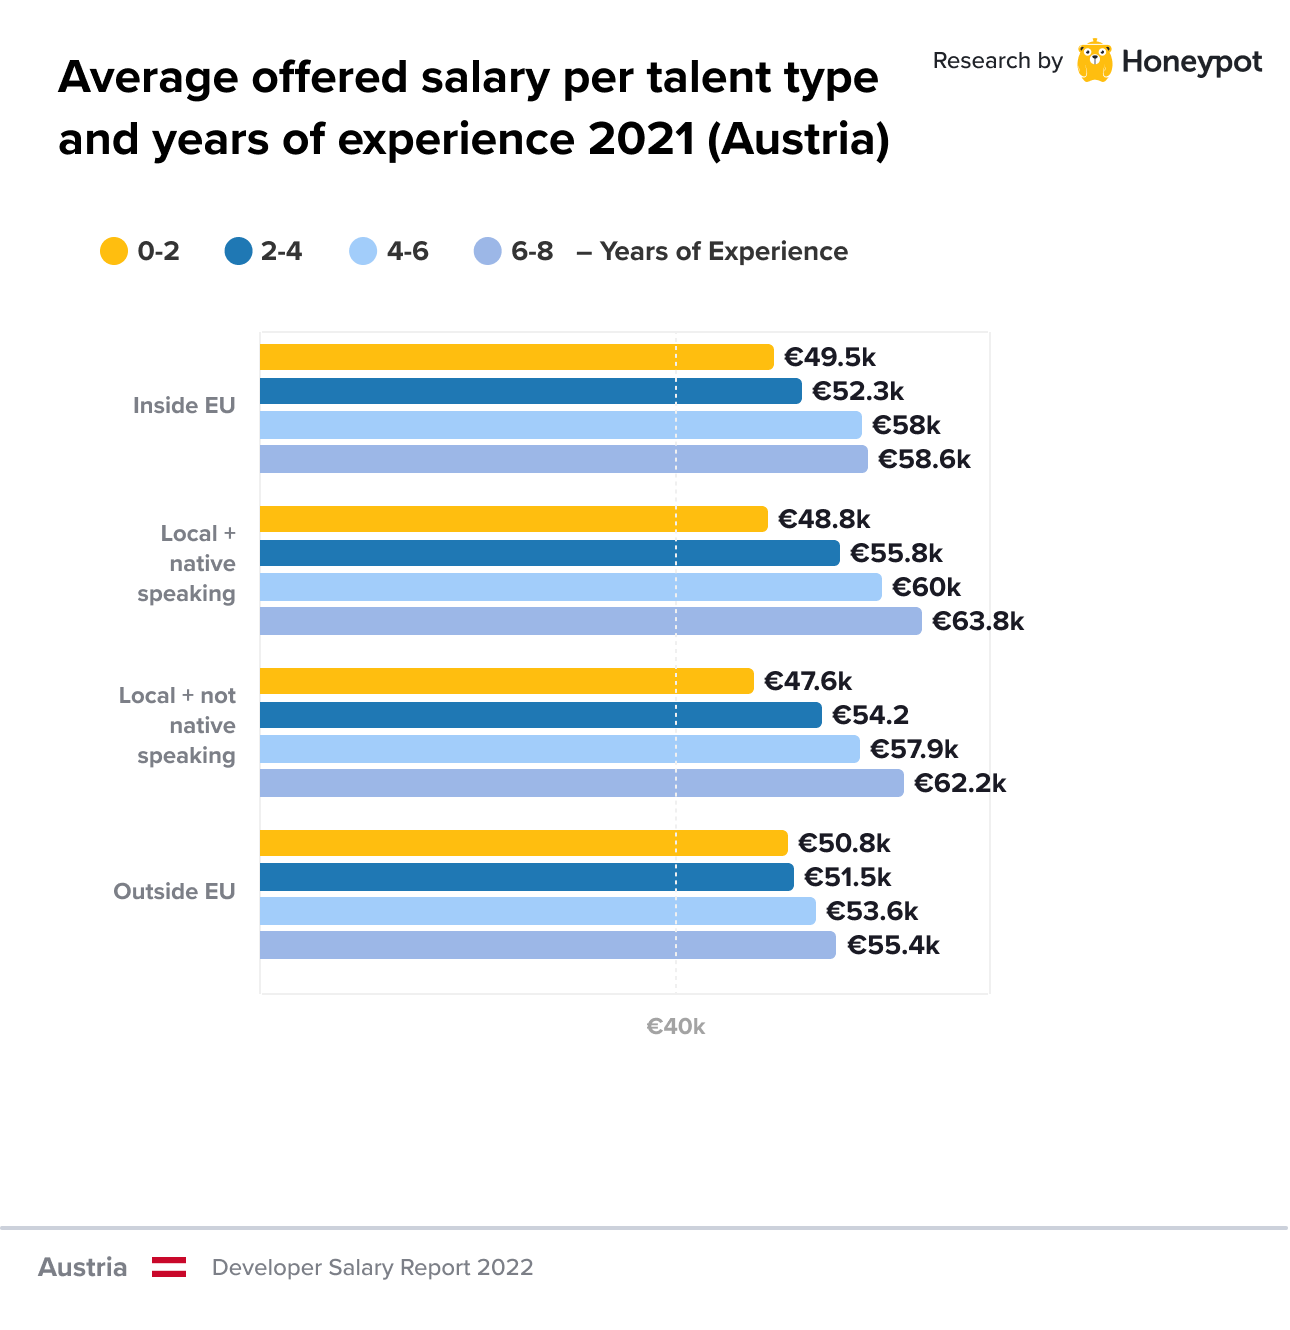 Average offered salary per talent type and years of experience 2021 (Austria)